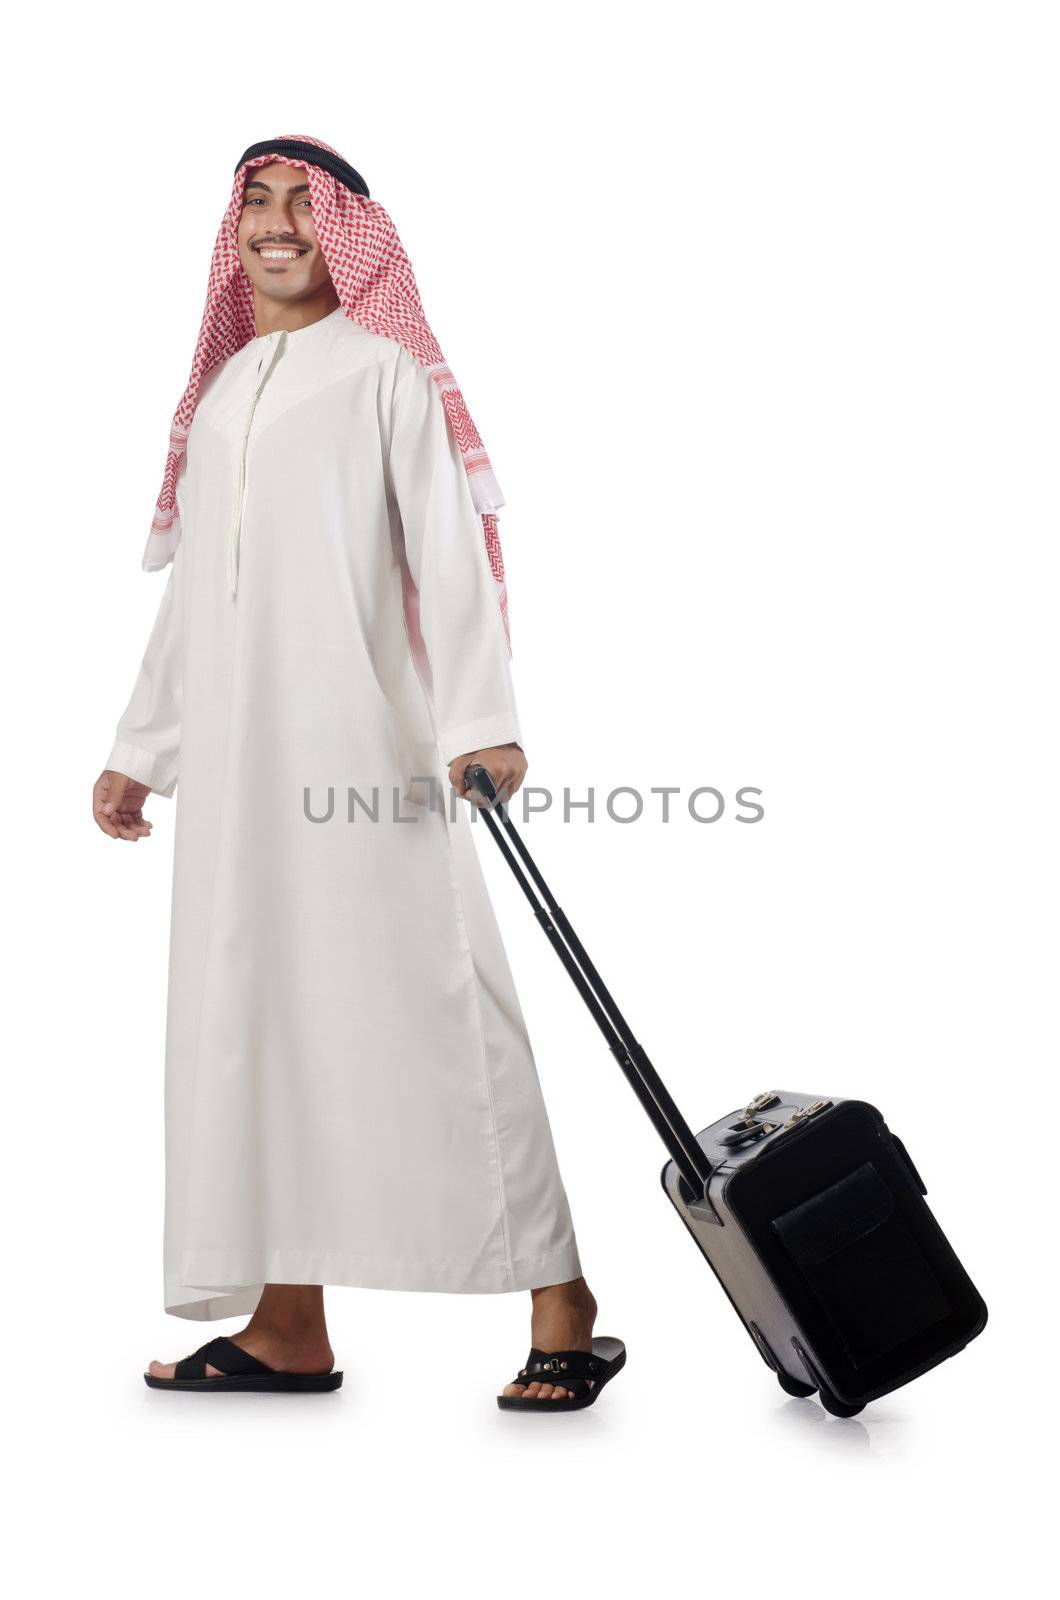 Arab on his travel with suitcase by Elnur